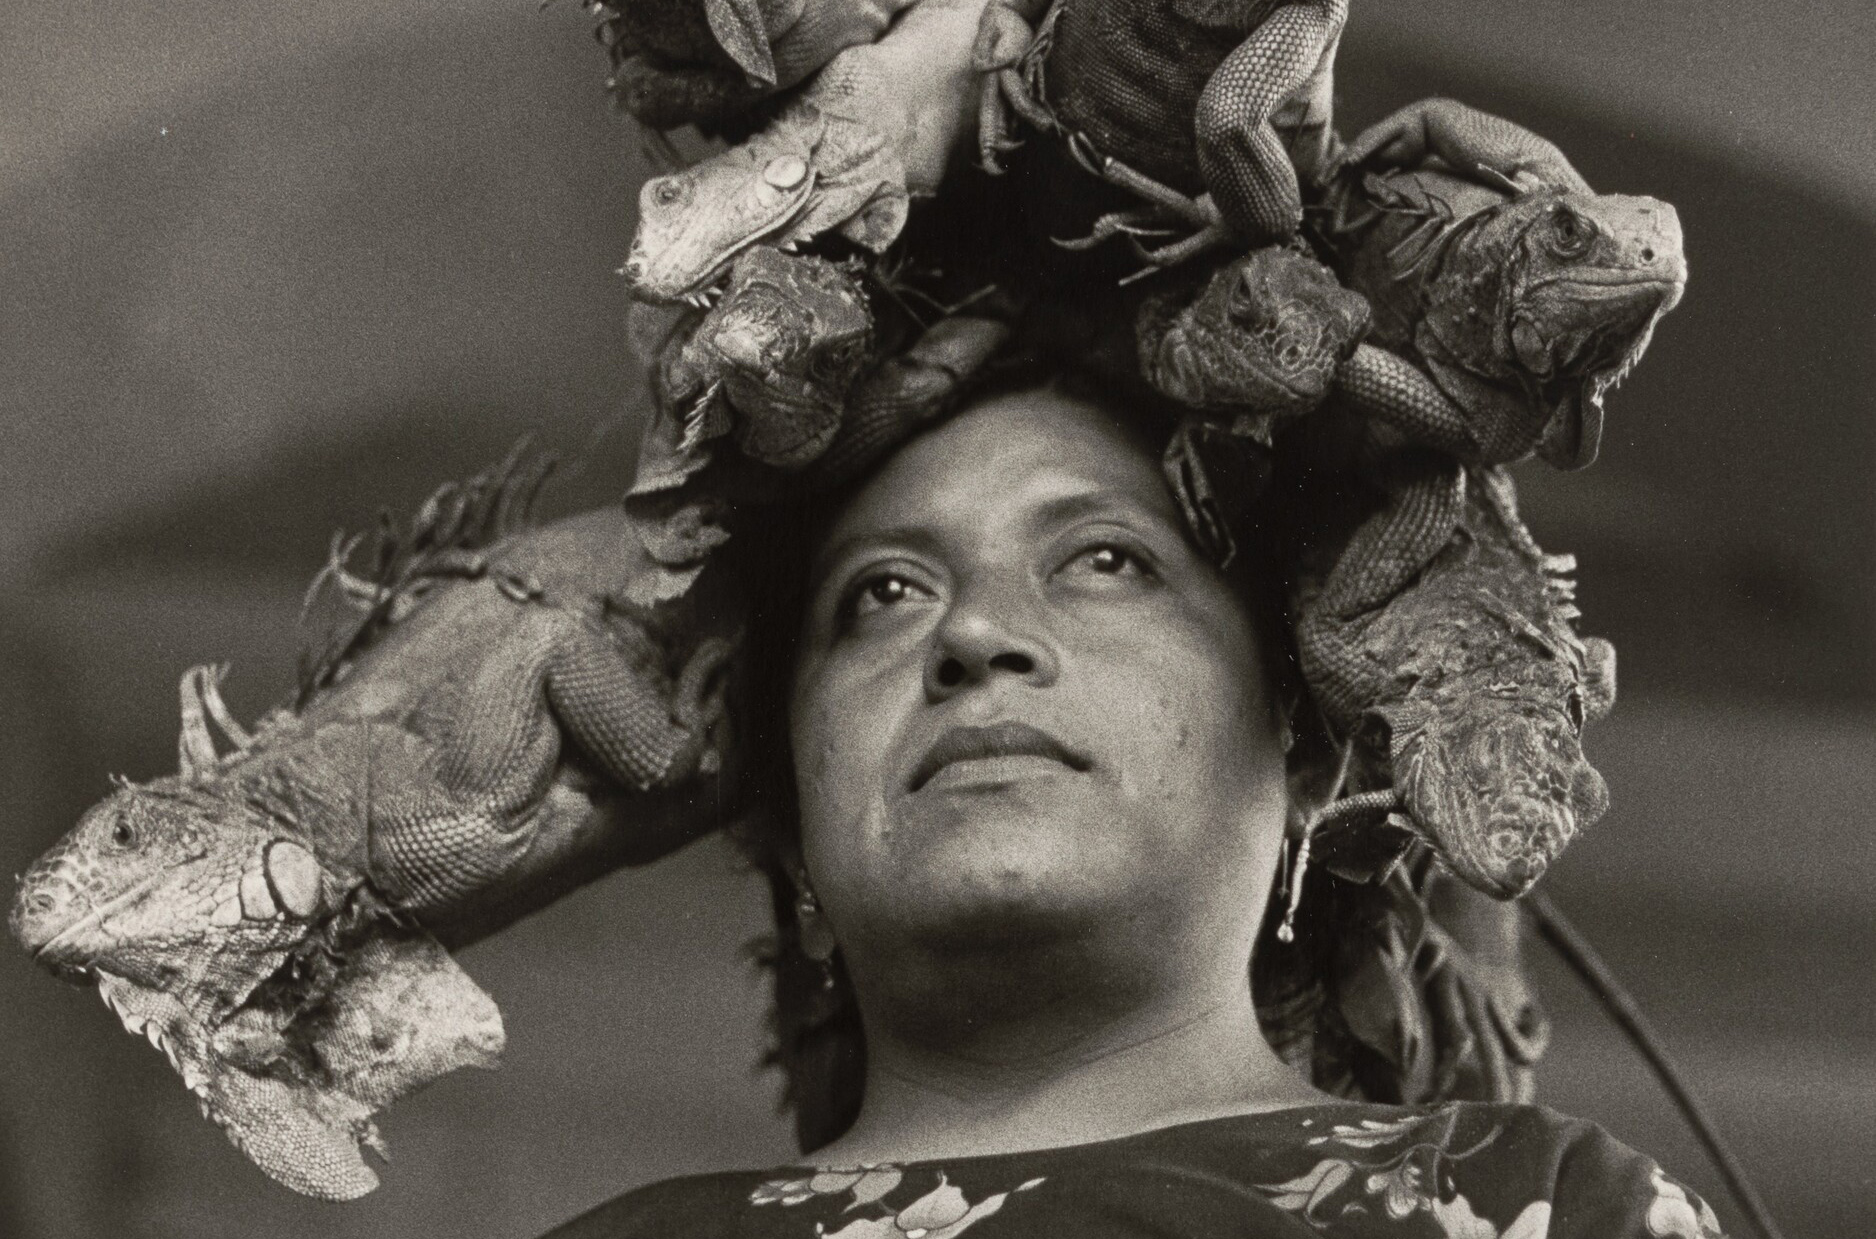 black and white photograph of a woman's hear with five iguanas standing on her head, creating a crown effect. The woman stares up and to the right with a stoic impression on her face.